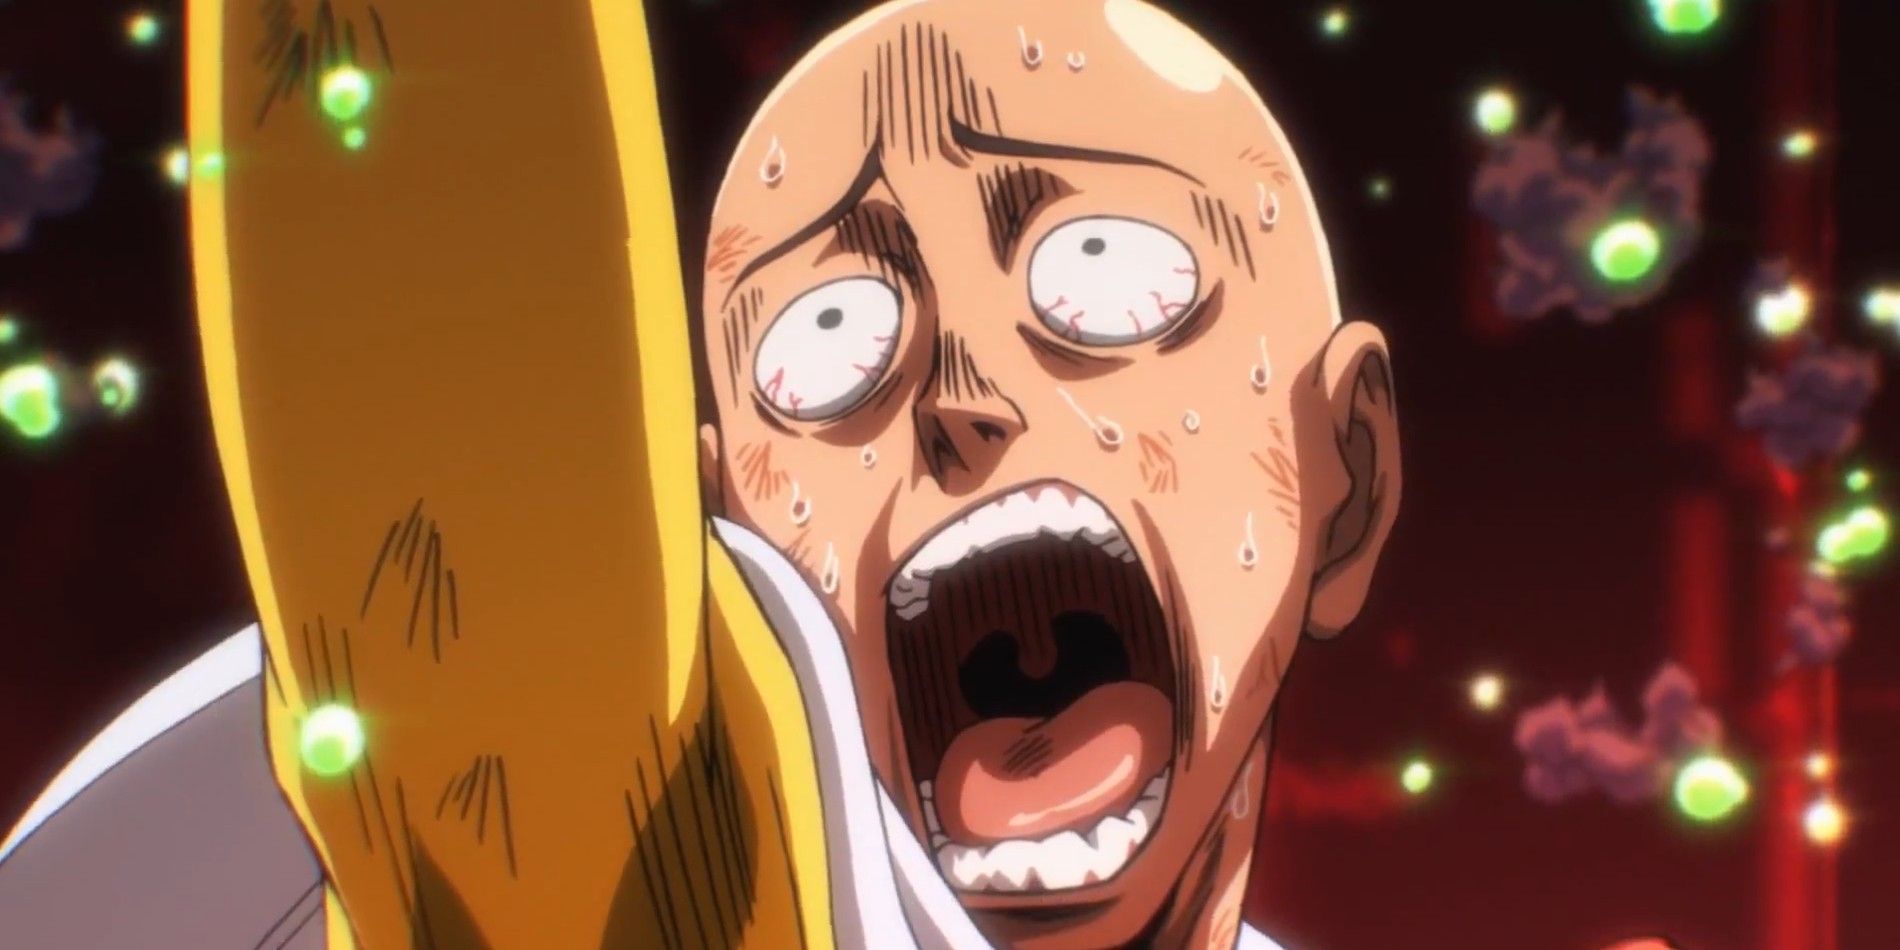 Saitama's overpowered punch in One Punch man